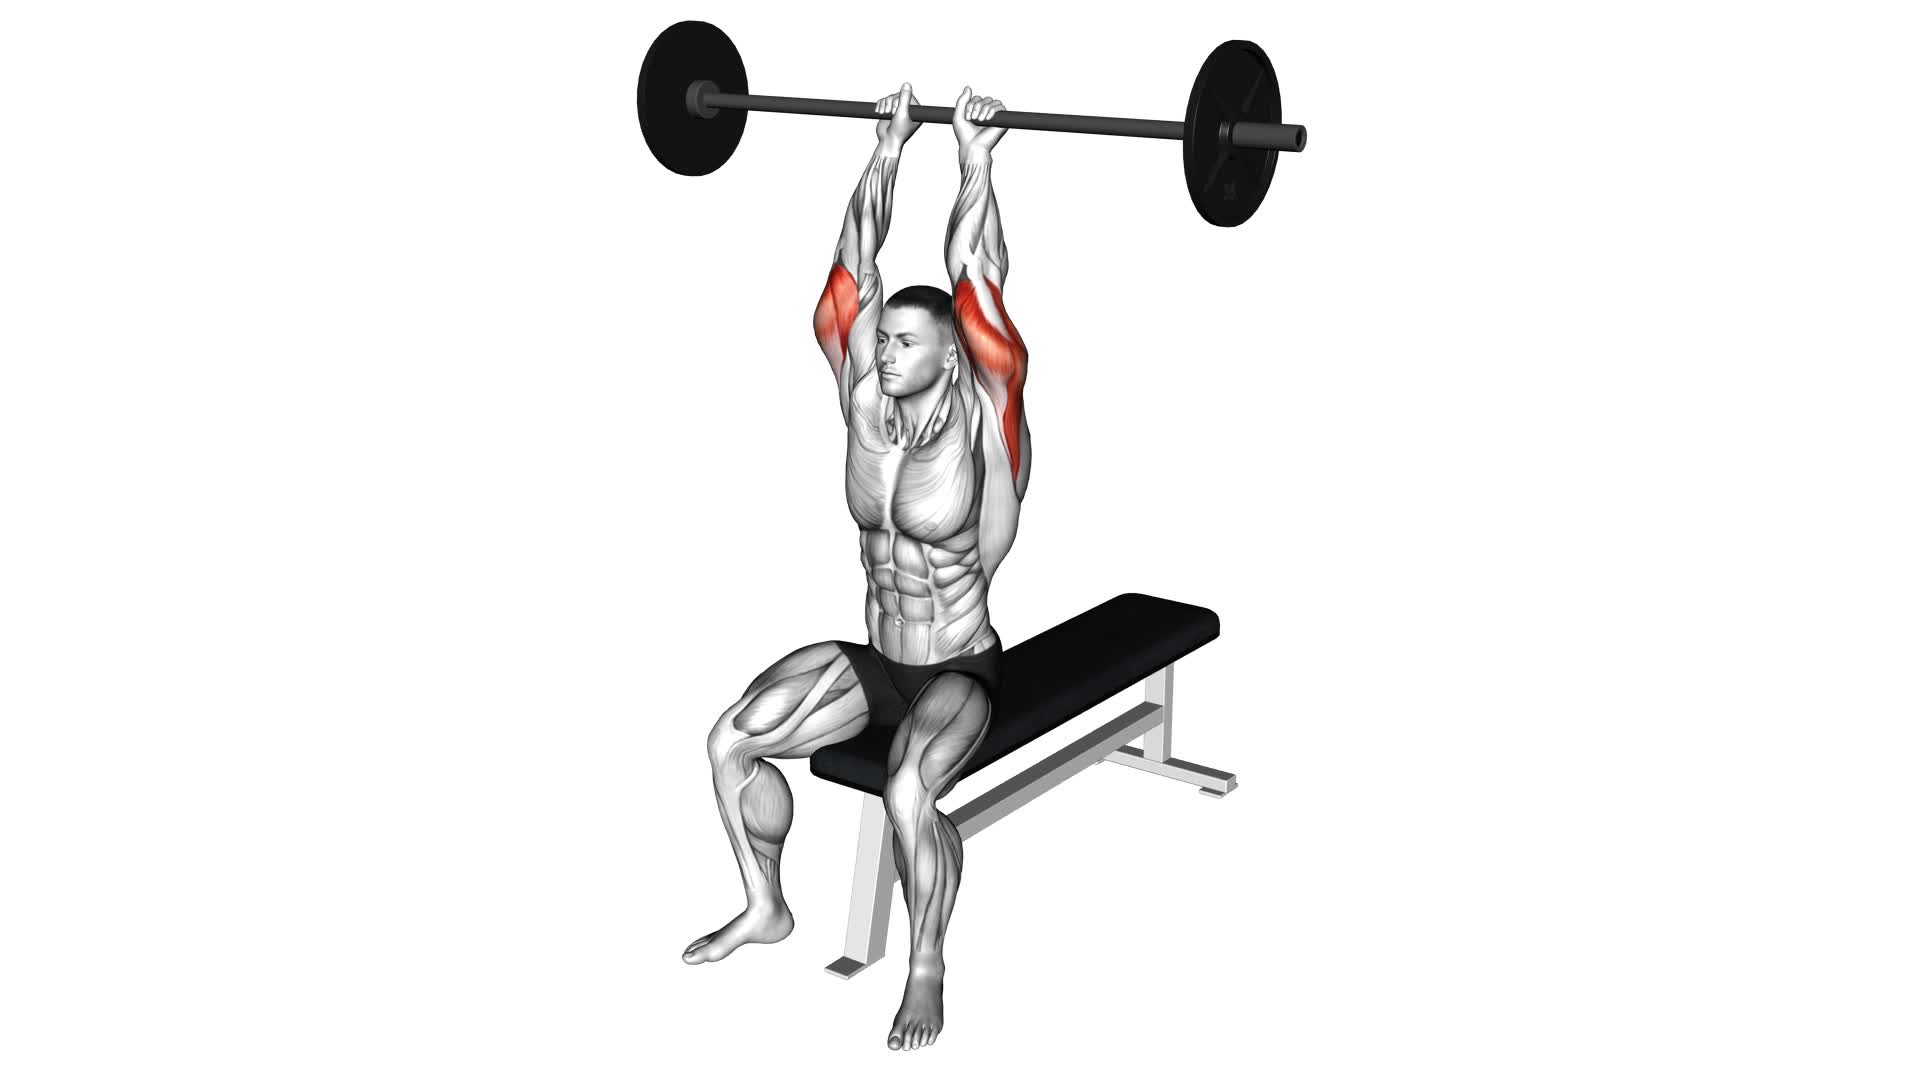 Barbell Seated Overhead Triceps Extension - Video Exercise Guide & Tips